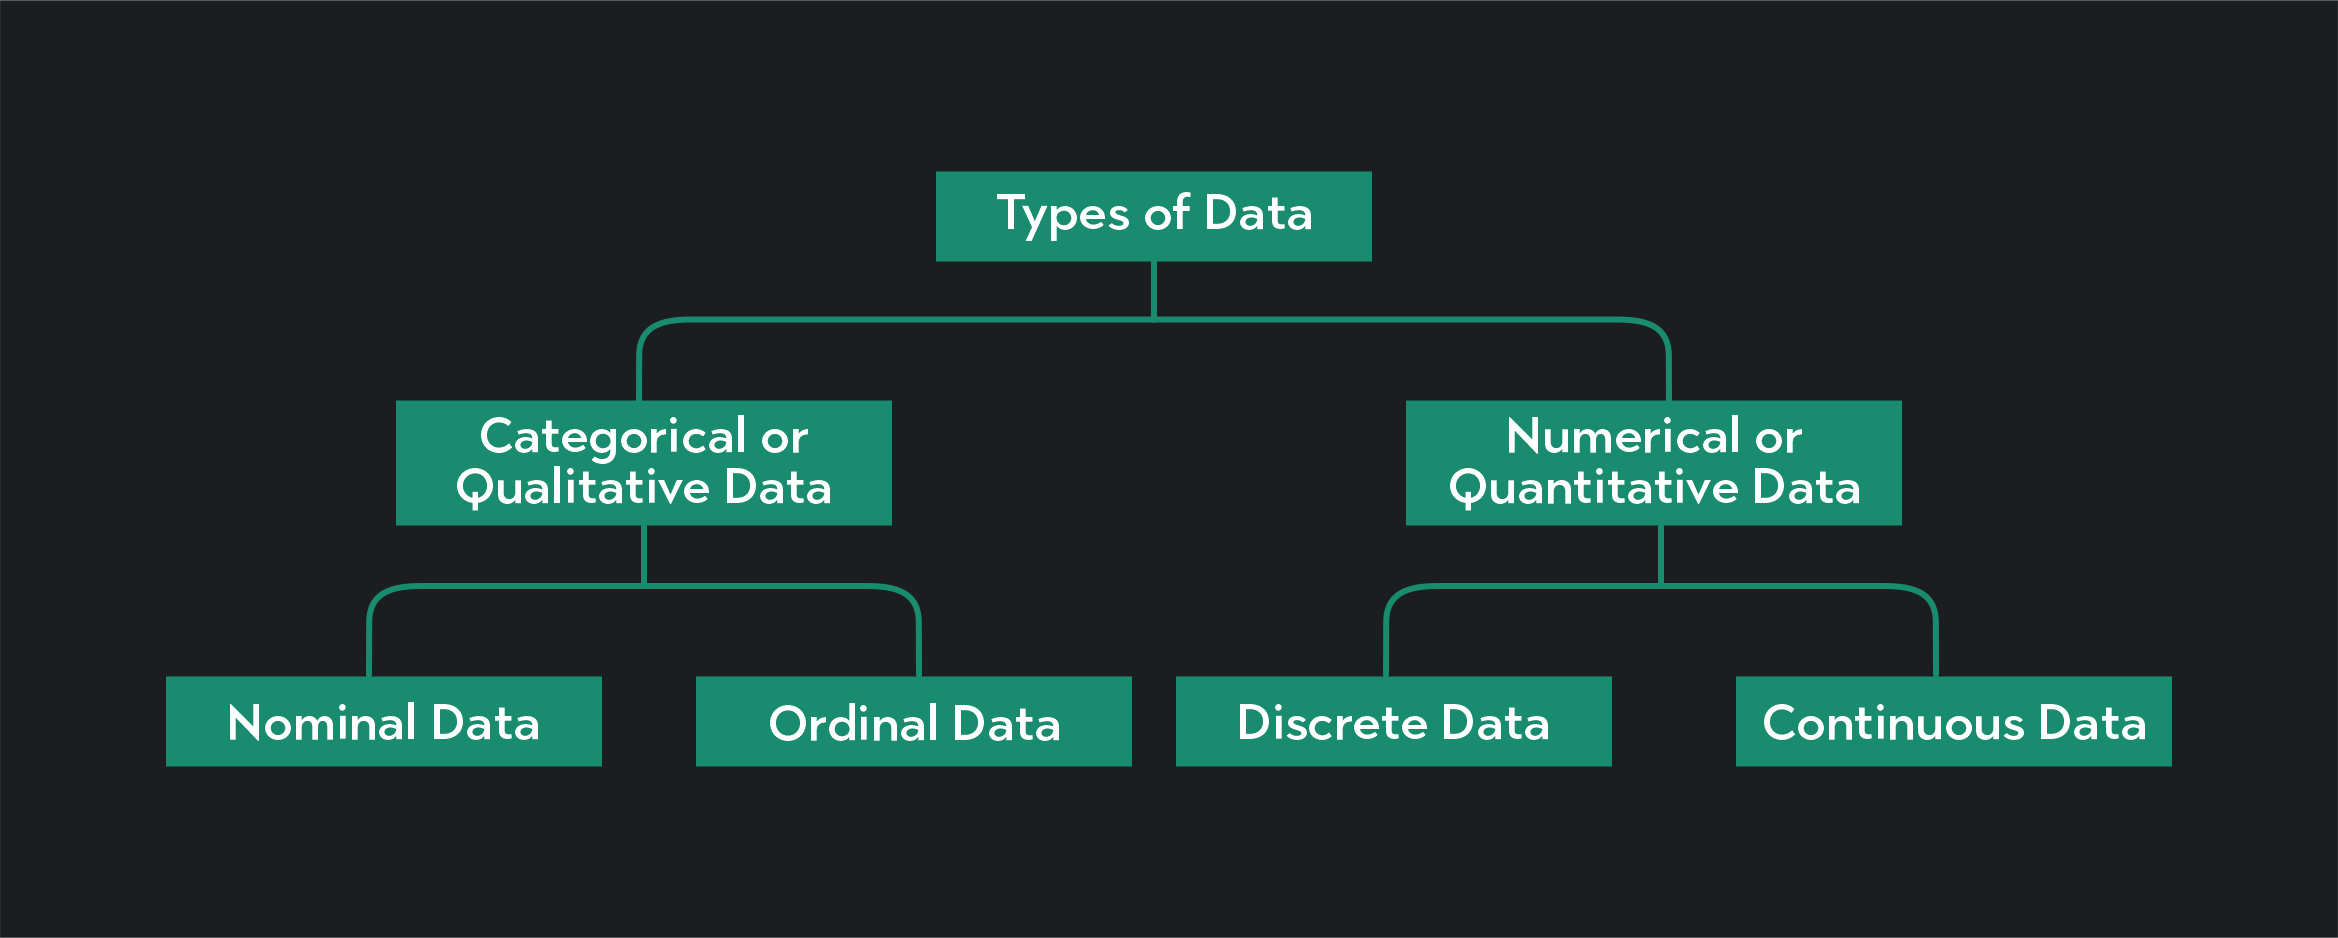 Graphic showing the types of data like categorical data, numerical data, nominal data, ordinal data, discrete data and continuos data